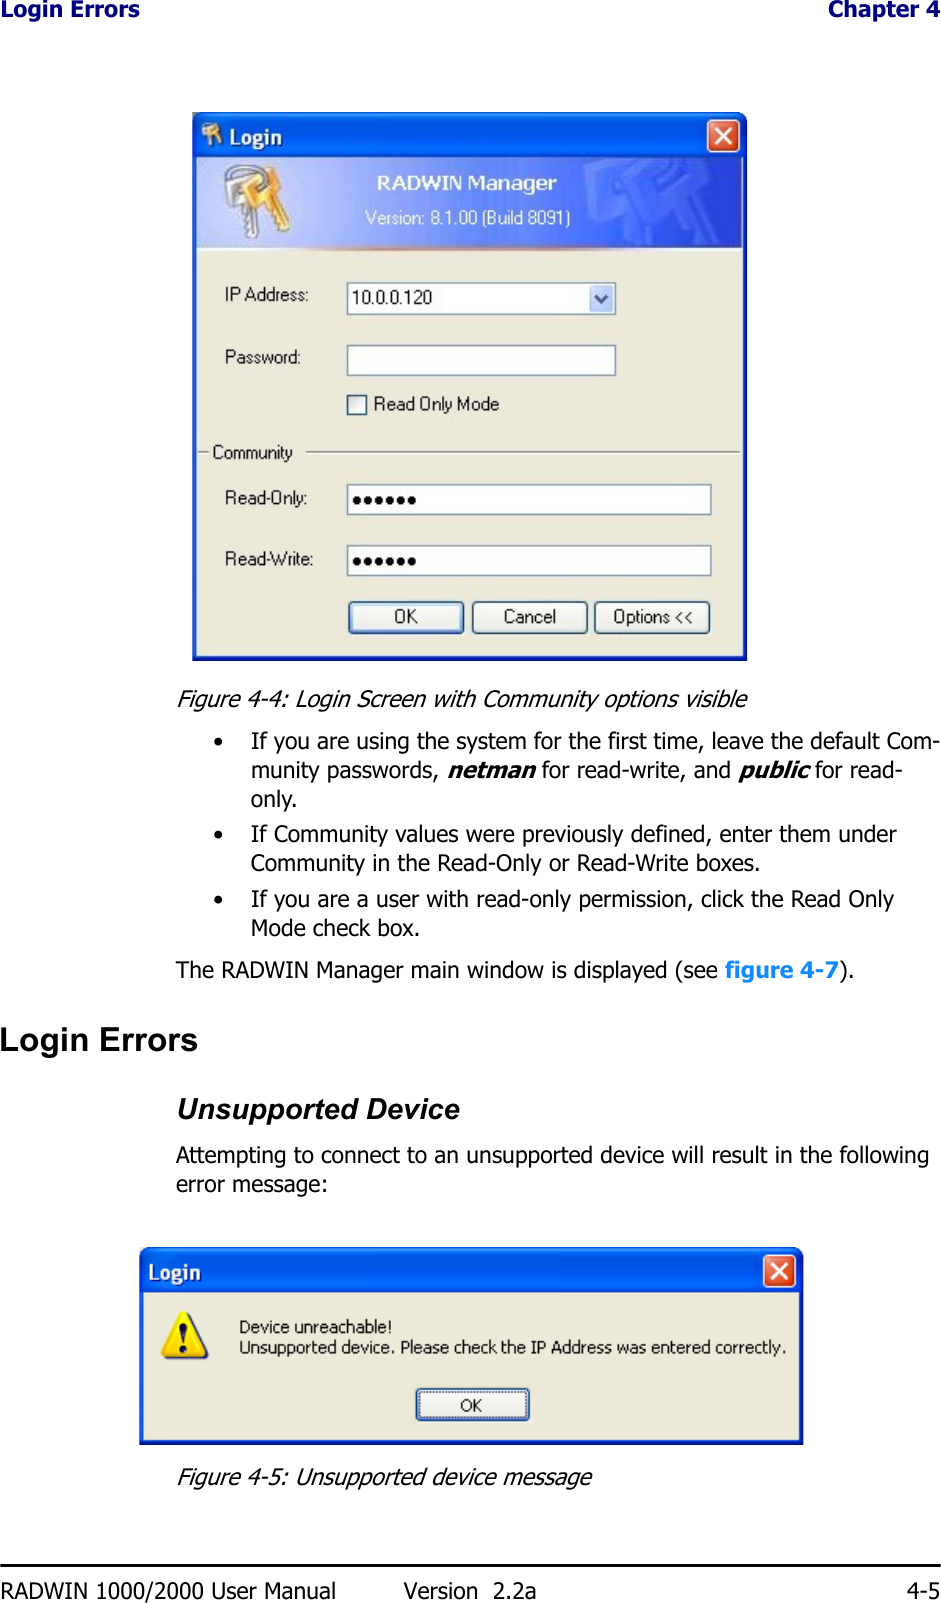 Login Errors  Chapter 4RADWIN 1000/2000 User Manual Version  2.2a 4-5Figure 4-4: Login Screen with Community options visible• If you are using the system for the first time, leave the default Com-munity passwords, netman for read-write, and public for read-only.• If Community values were previously defined, enter them under Community in the Read-Only or Read-Write boxes.• If you are a user with read-only permission, click the Read Only Mode check box.The RADWIN Manager main window is displayed (see figure 4-7).Login ErrorsUnsupported DeviceAttempting to connect to an unsupported device will result in the following error message:Figure 4-5: Unsupported device message